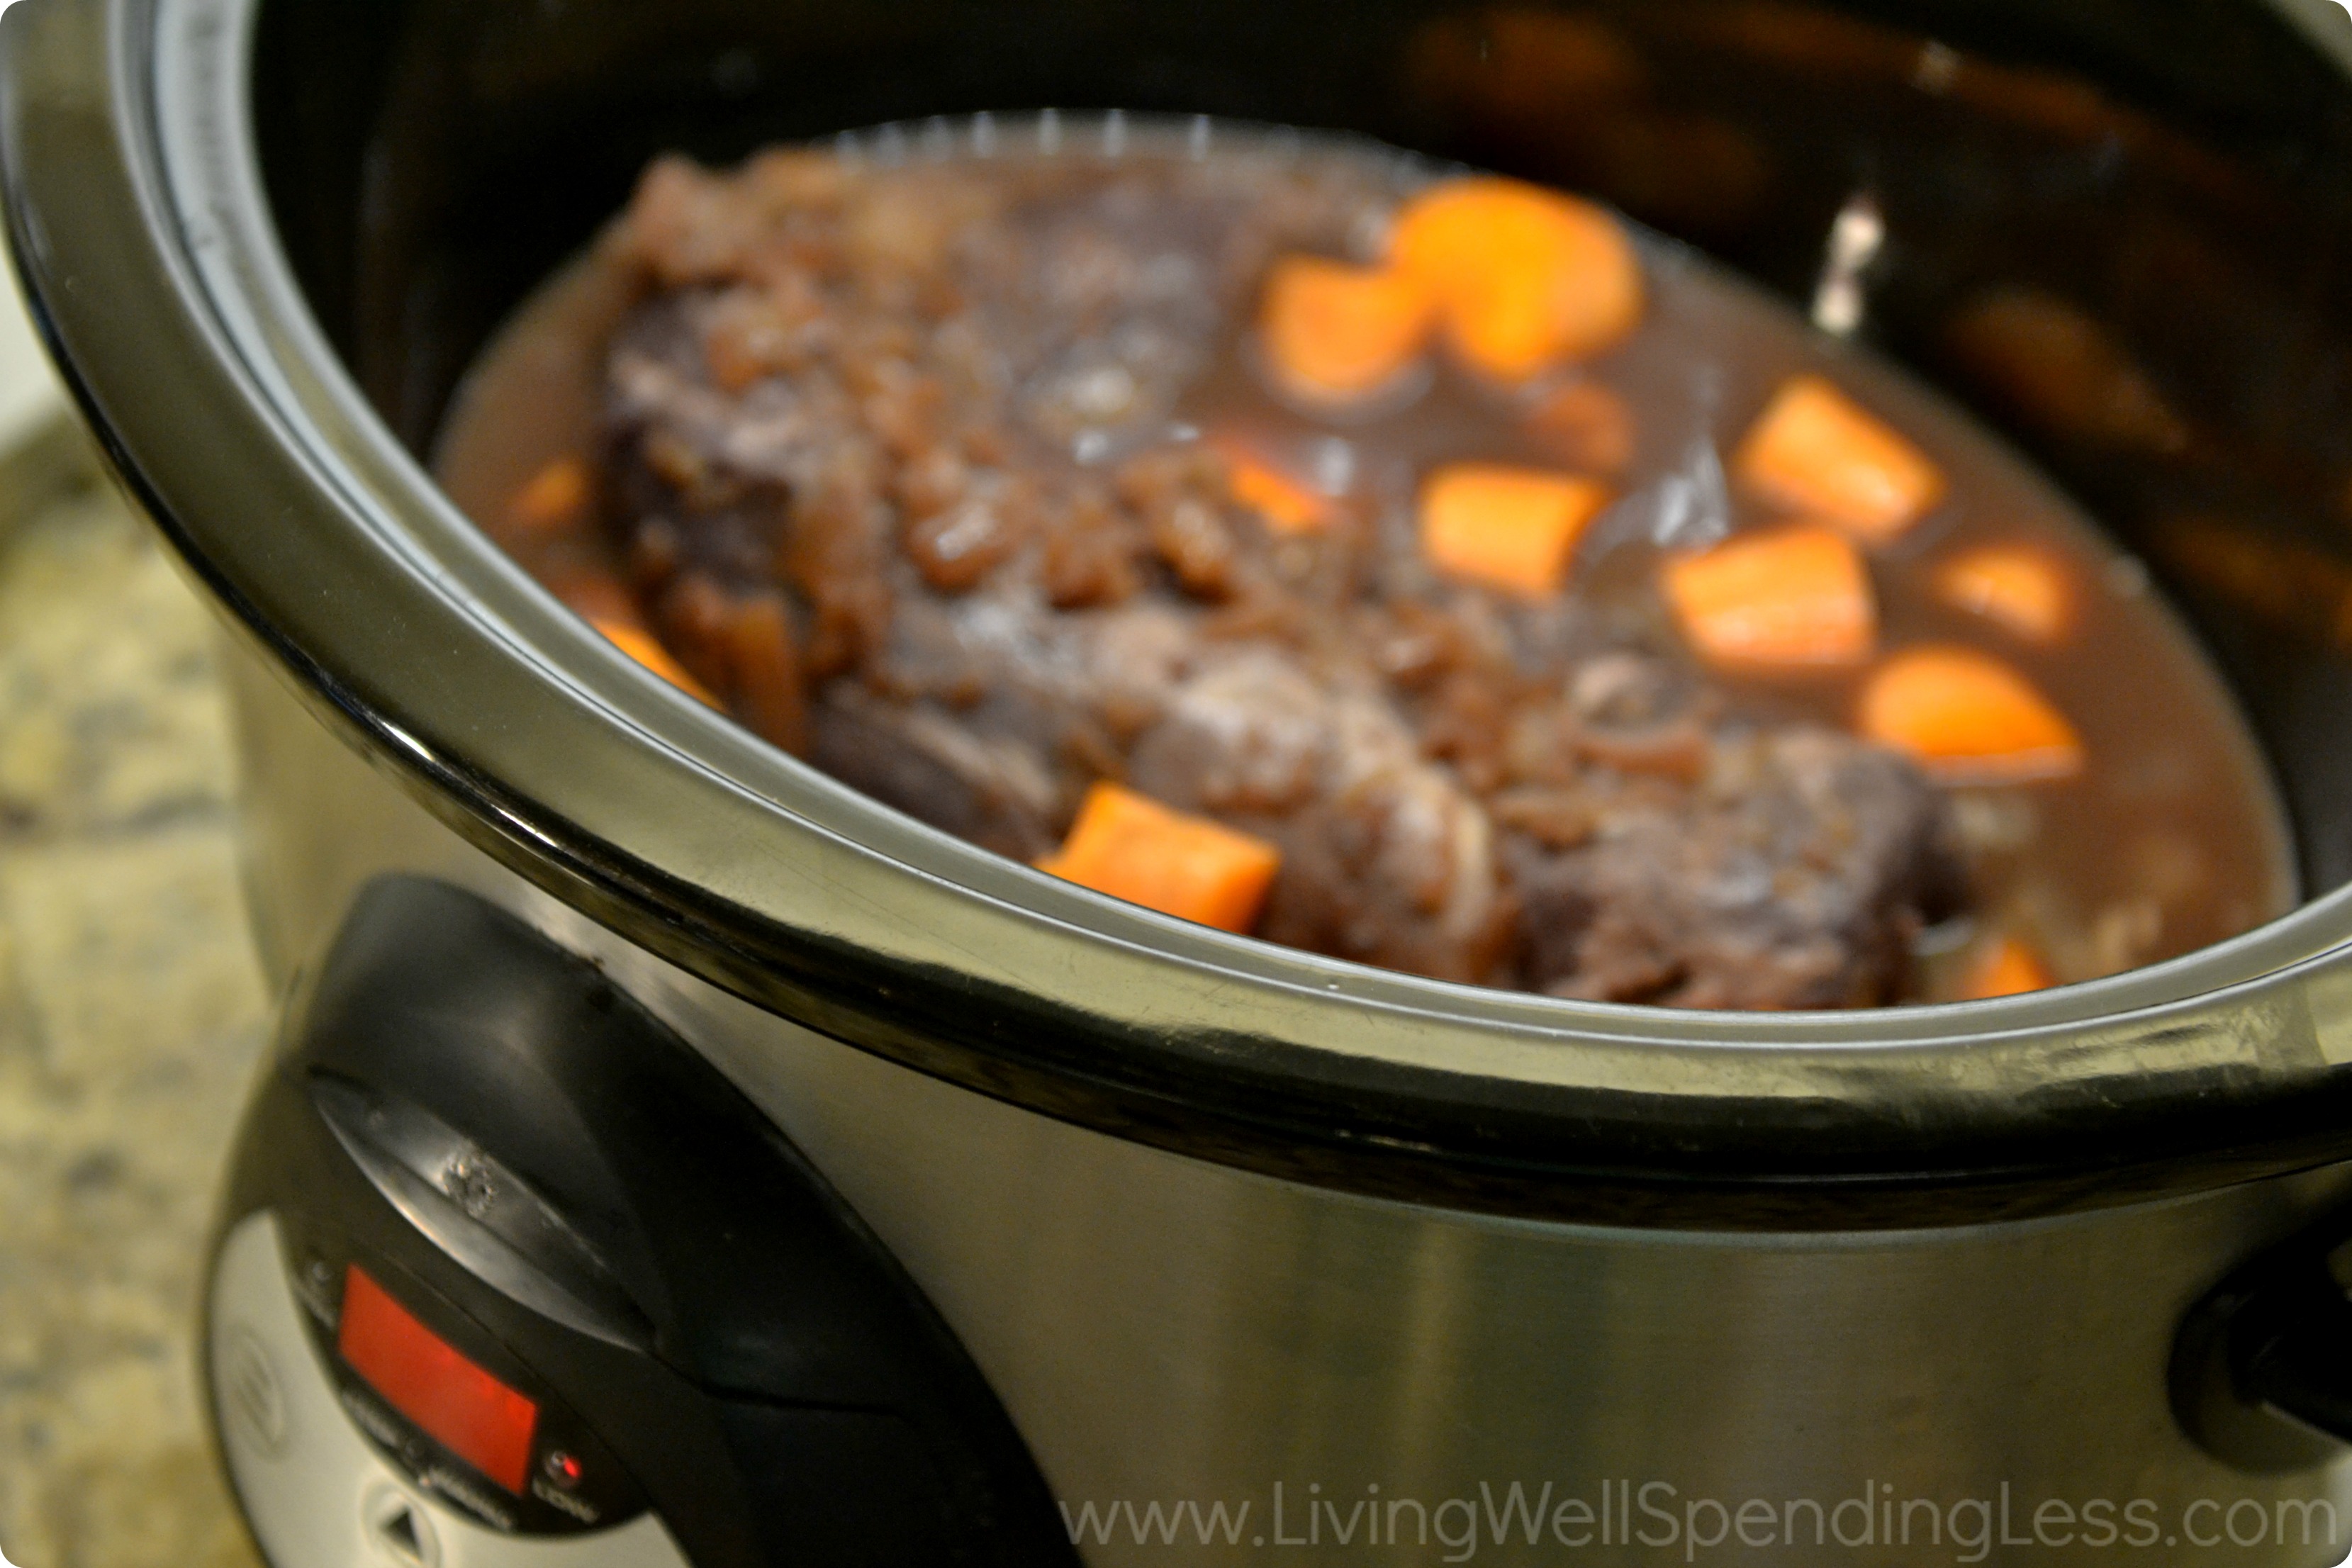 When you're ready to cook, add the meat to the slow cooker along with chopped carrots. 